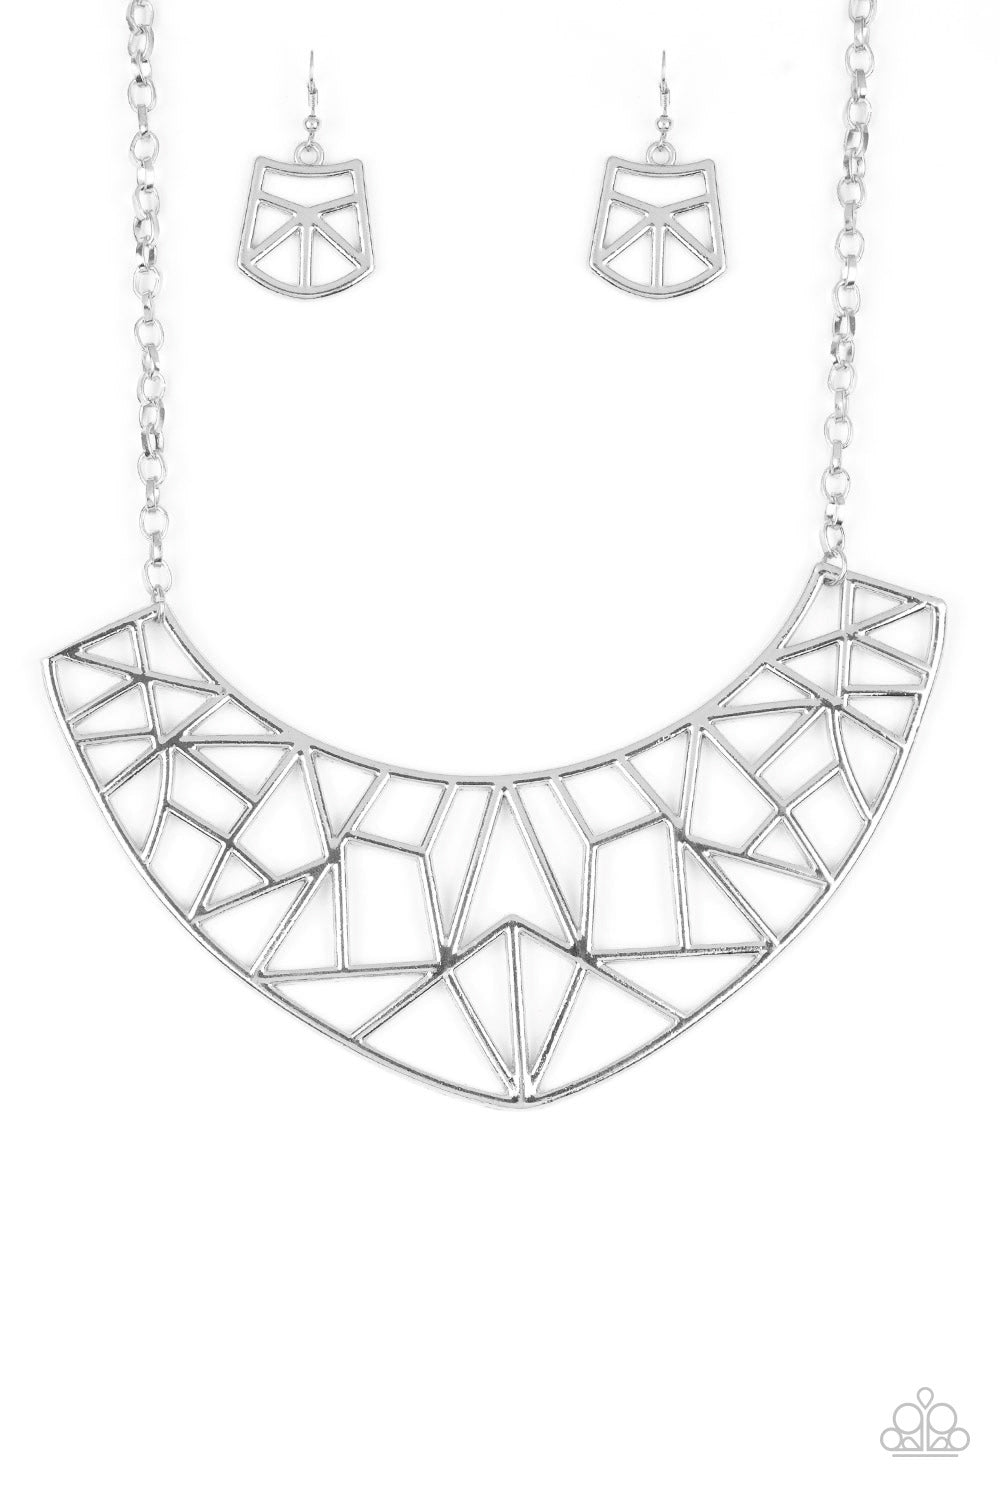 Strike While HAUTE - Silver Necklace Earring Set 525